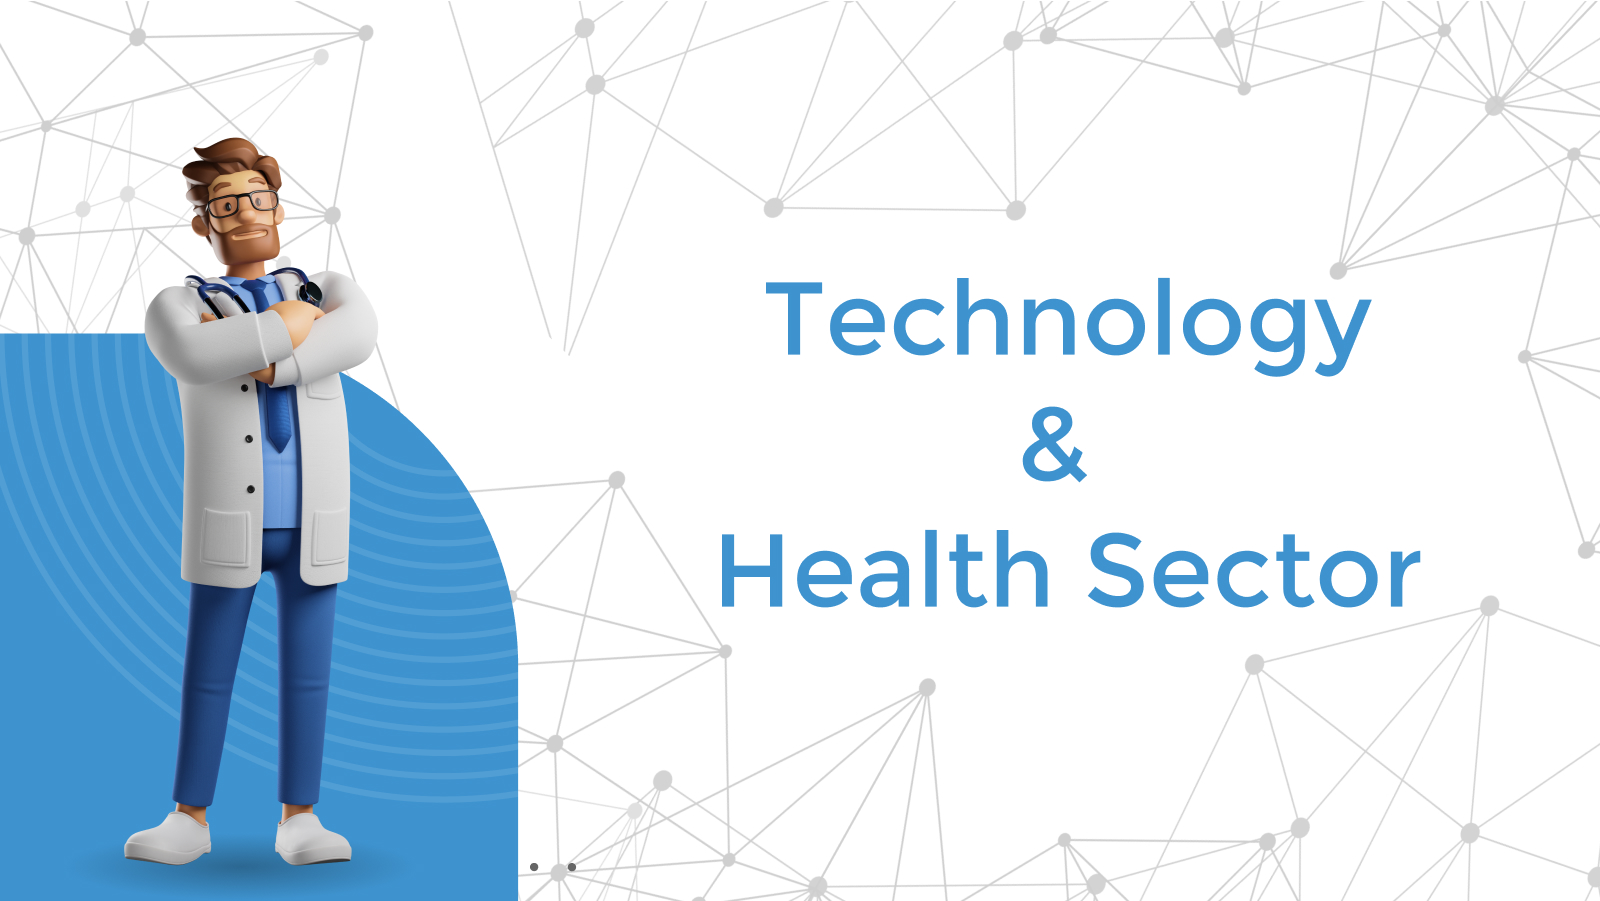 TECHNOLOGY AND HEALTH SECTOR